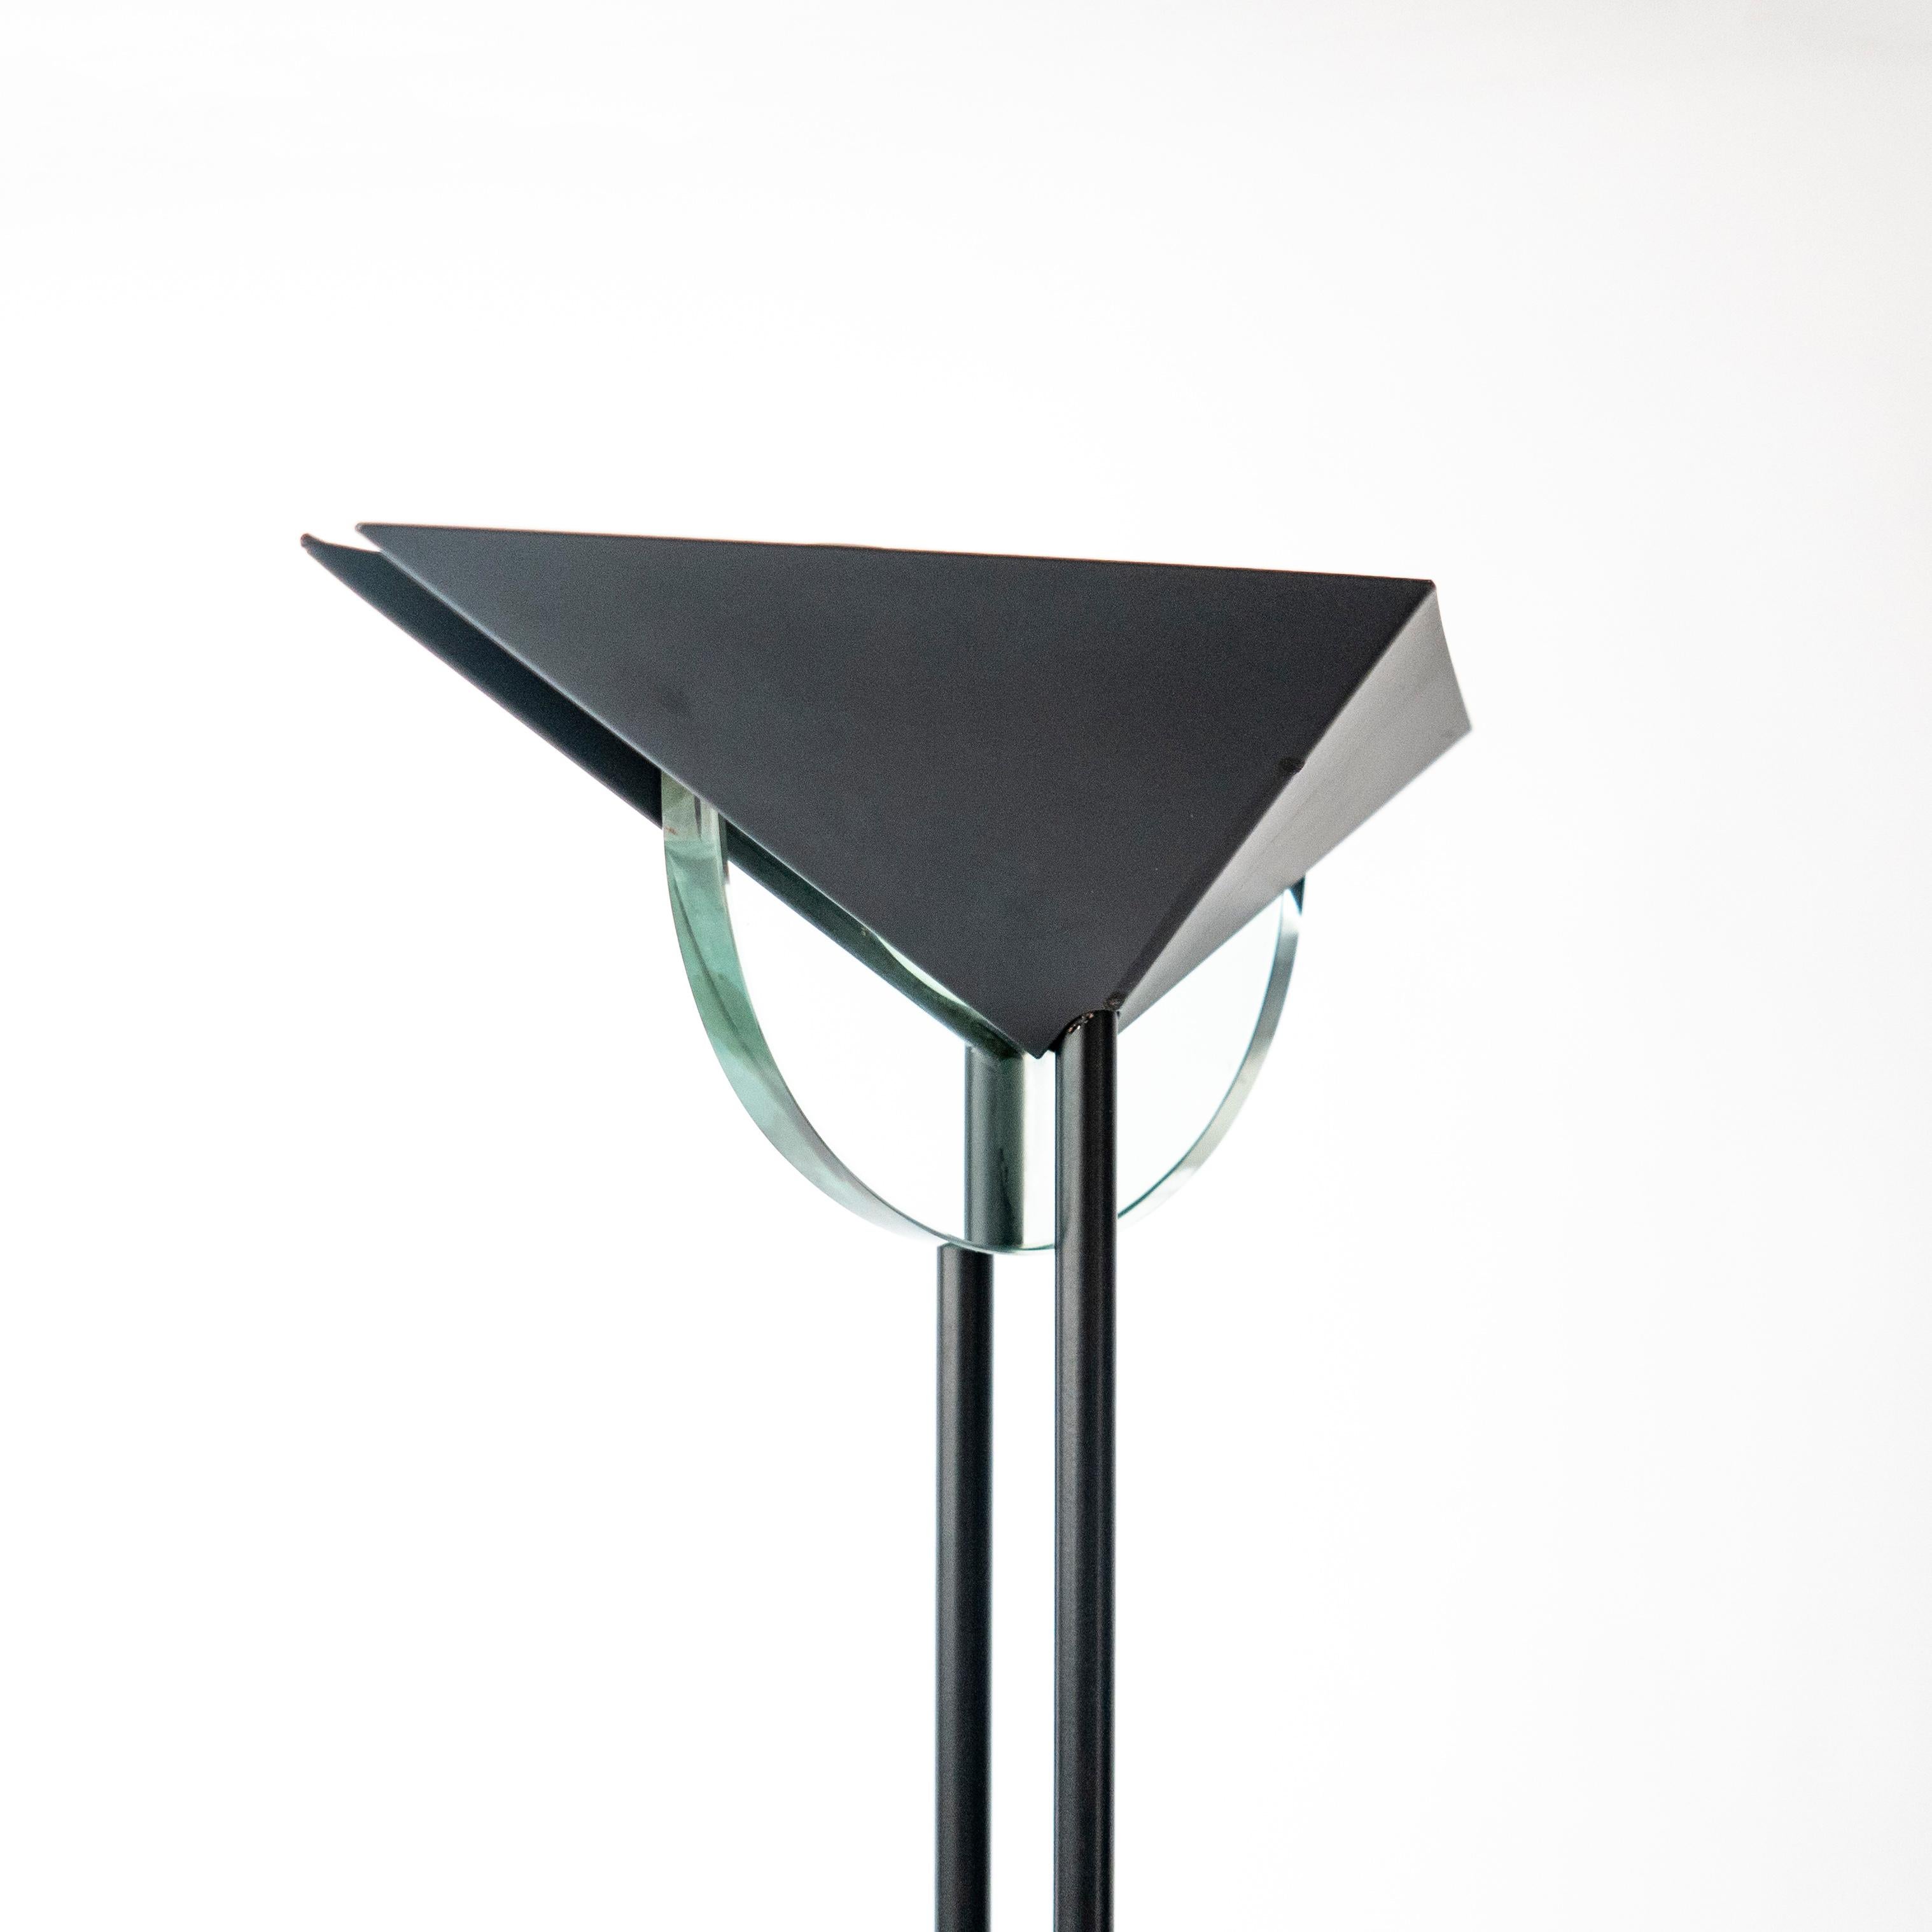 Vintage 1990s floor lamp in the style of Fontana Arte, with a metal structure painted in matte black and a rhomboidal lampshade concealing an alogen light bulb. Two decorative touches are added by a half-moon in aquamarine glass at the top, and a